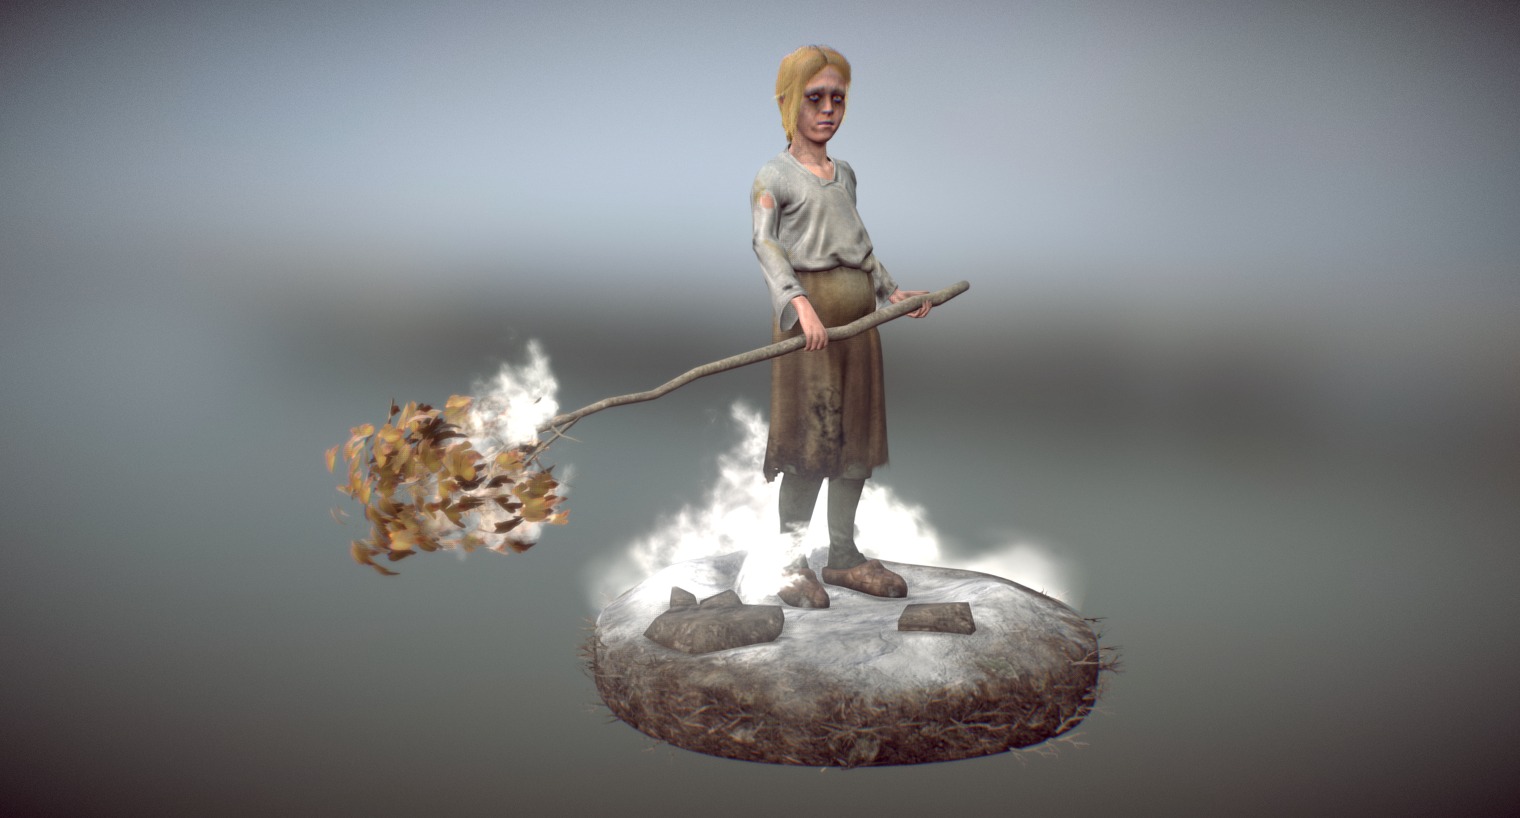 A 3D reconstruction of one of the most famous finnish paintings called Under The Yoke (Burning The Brushwood) by Eero Järnefelt..

This diorama is only a small part from a full virtual-reality reconstruction of the painting made in Unreal Engine 4 by ZOAN. More informations about the project soon.

3D sculpting by Marcelo Prado 3d model